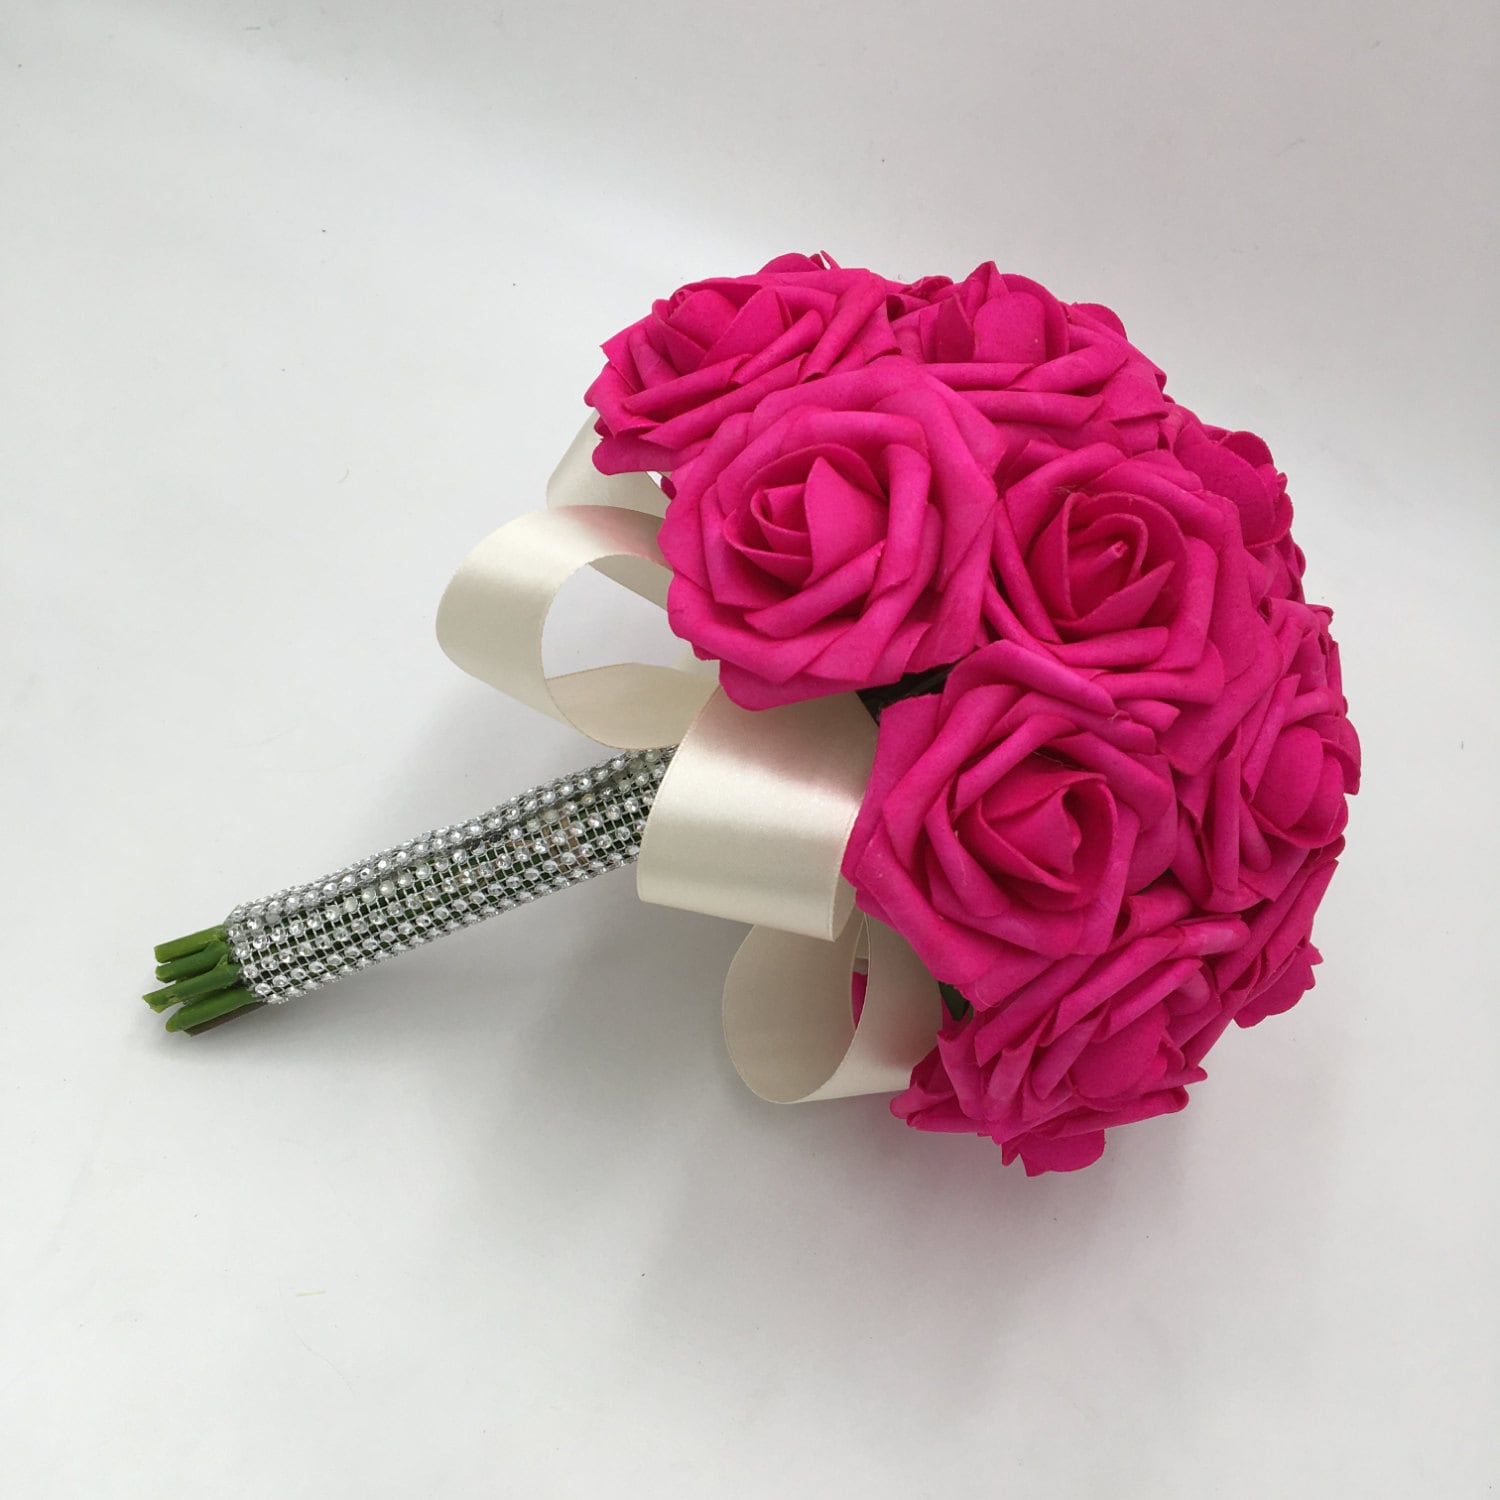 SILK ROSES WEDDING BOUQUET HOT PINK PRE MADE ROSE FLOWERS ARTIFICIAL FLOWER POSY 